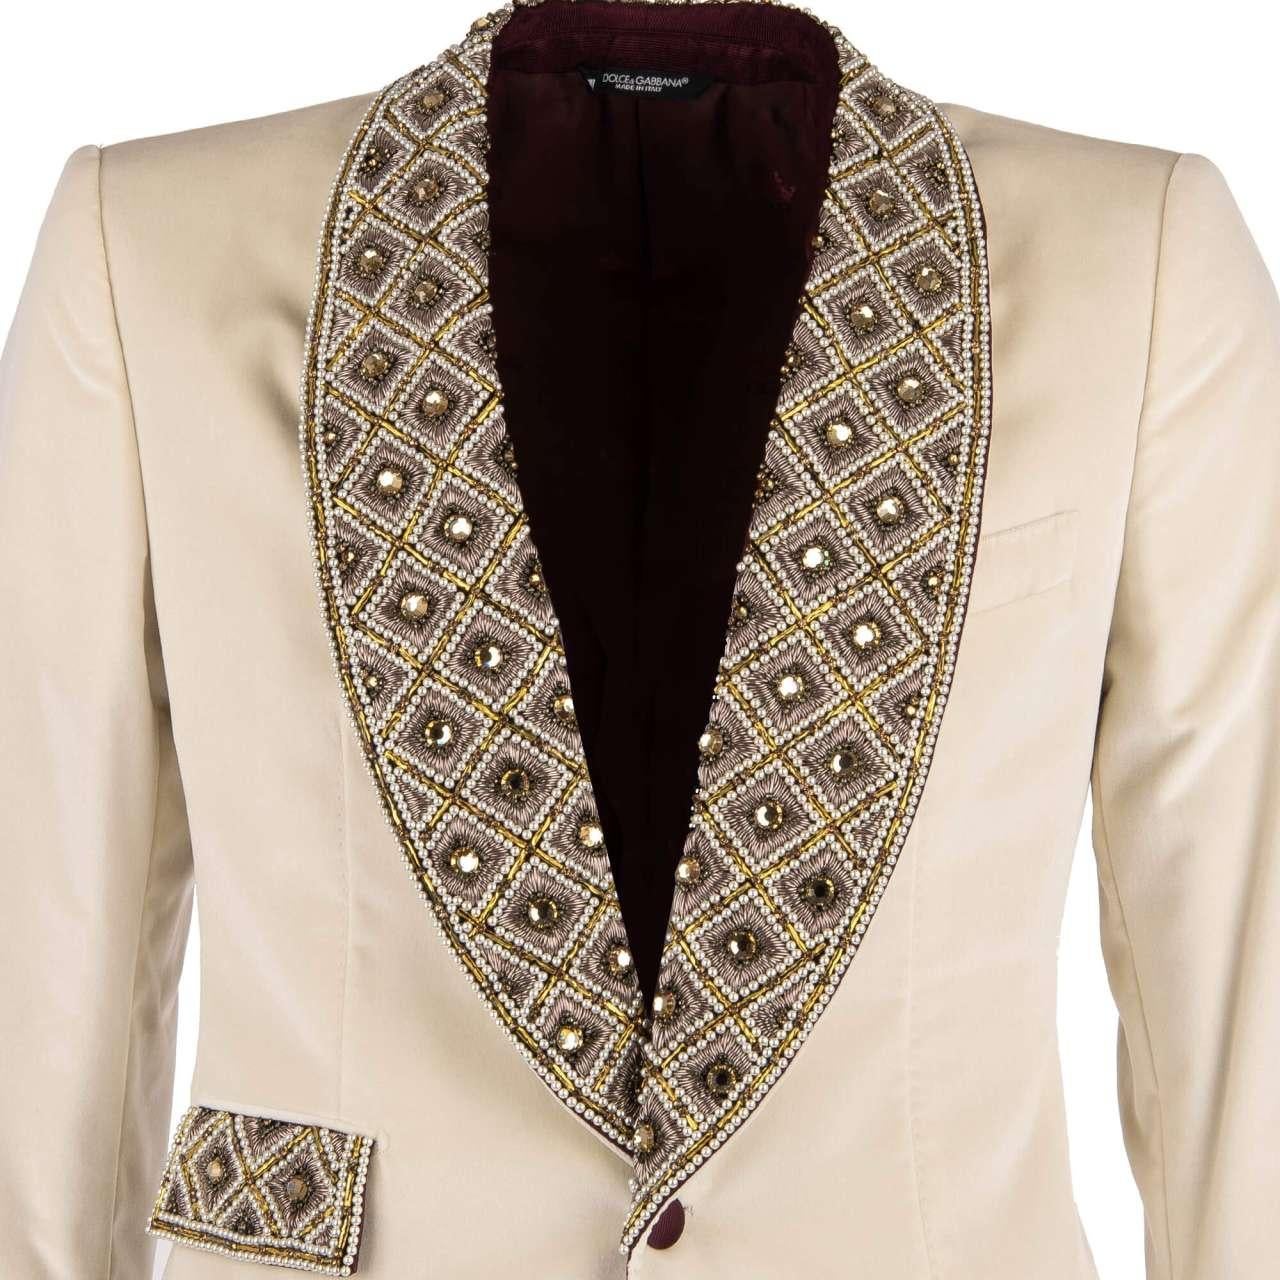 D&G Velvet Tuxedo Blazer with Crystals, Pearls and Gold Embroidery White 56 In Excellent Condition For Sale In Erkrath, DE